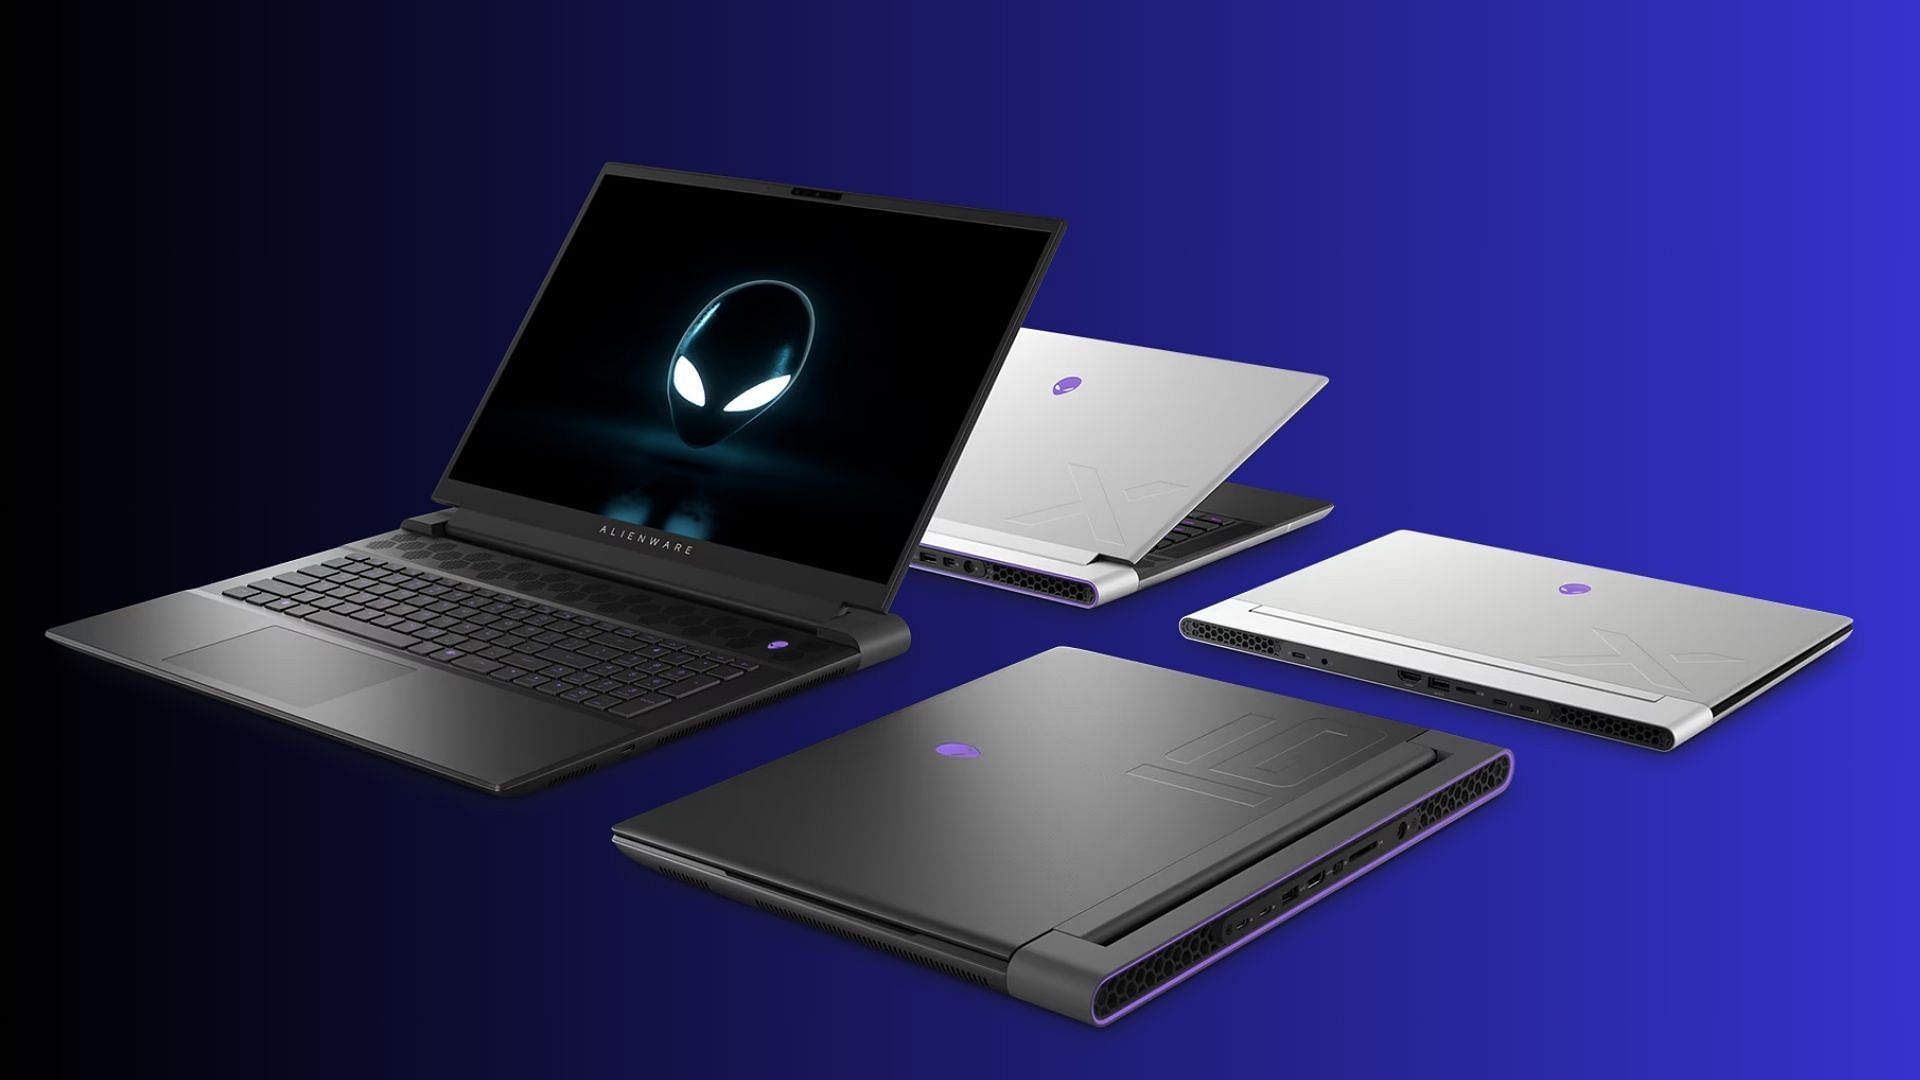 Top gaming laptops equipped with 16GB RAM (Image via Dell)